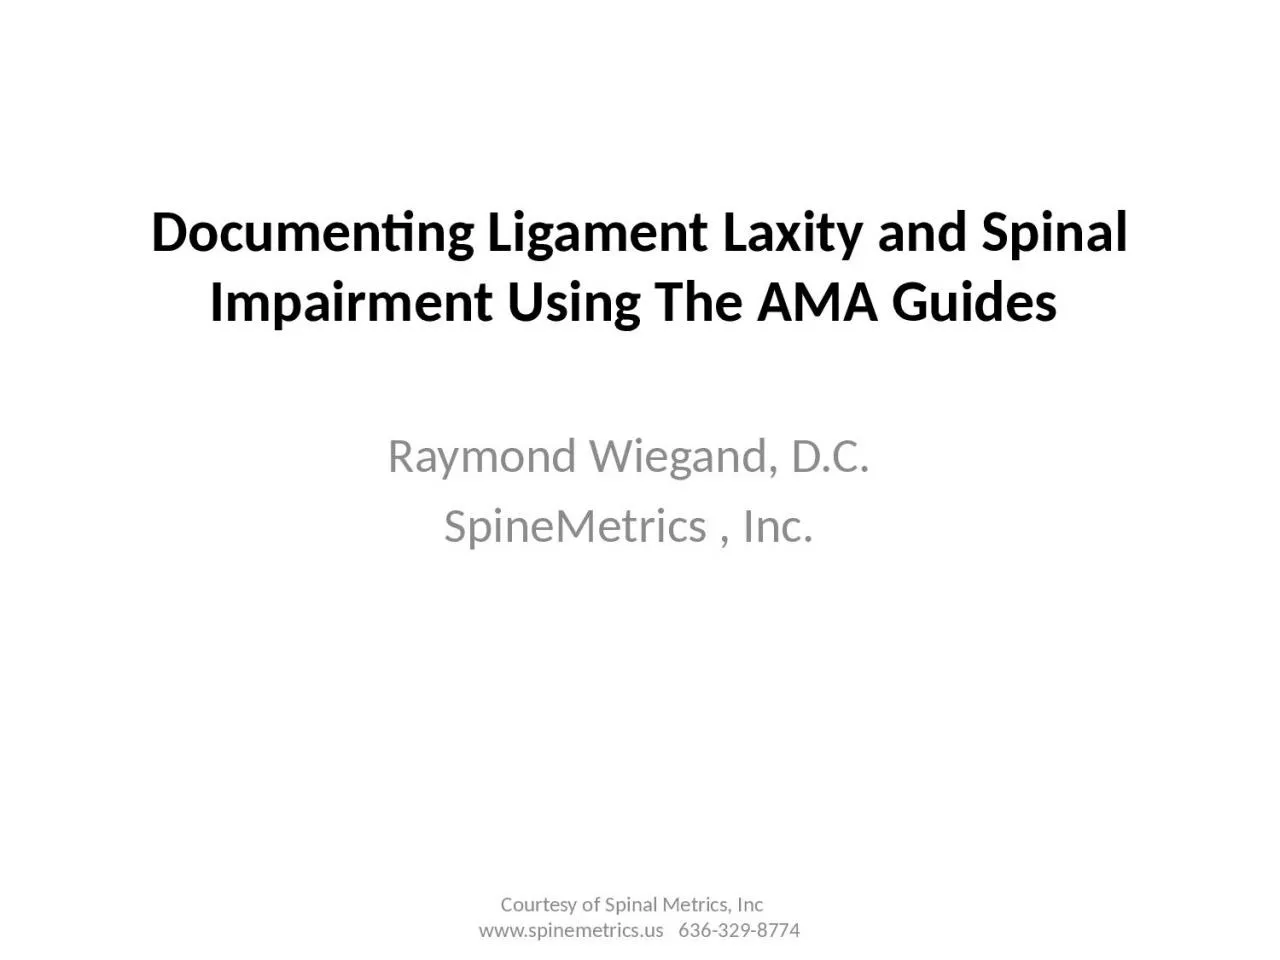 Documenting Ligament Laxity and Spinal Impairment Using The AMA Guides